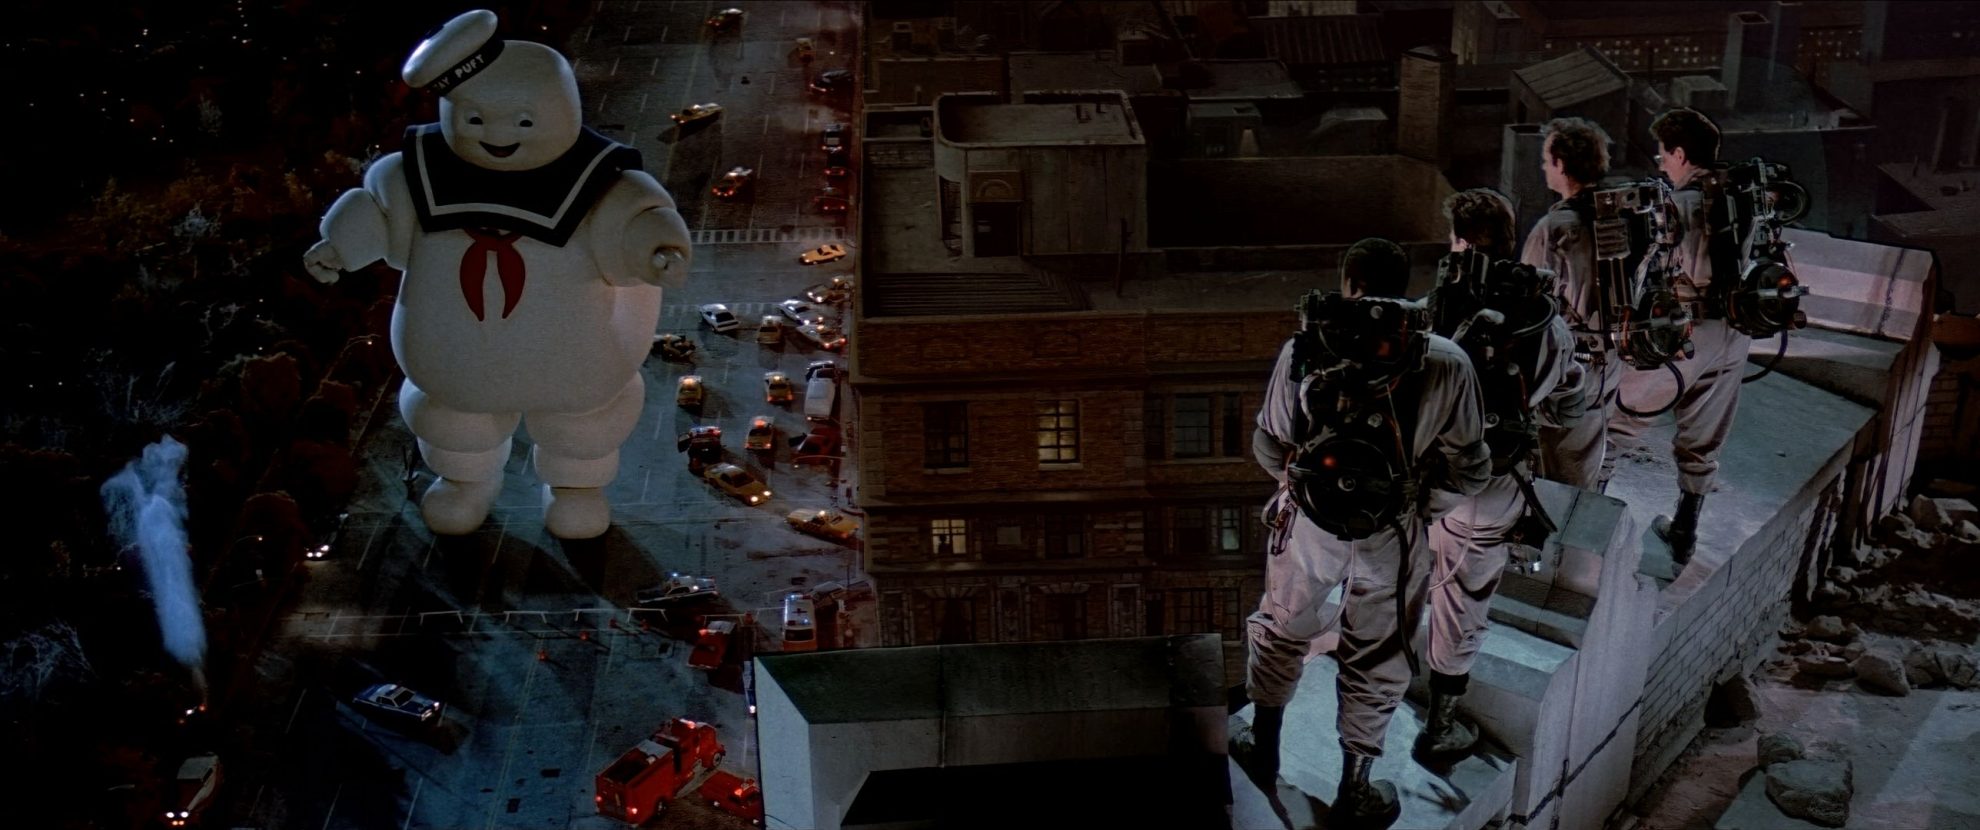 Special Effects in Ghostbusters